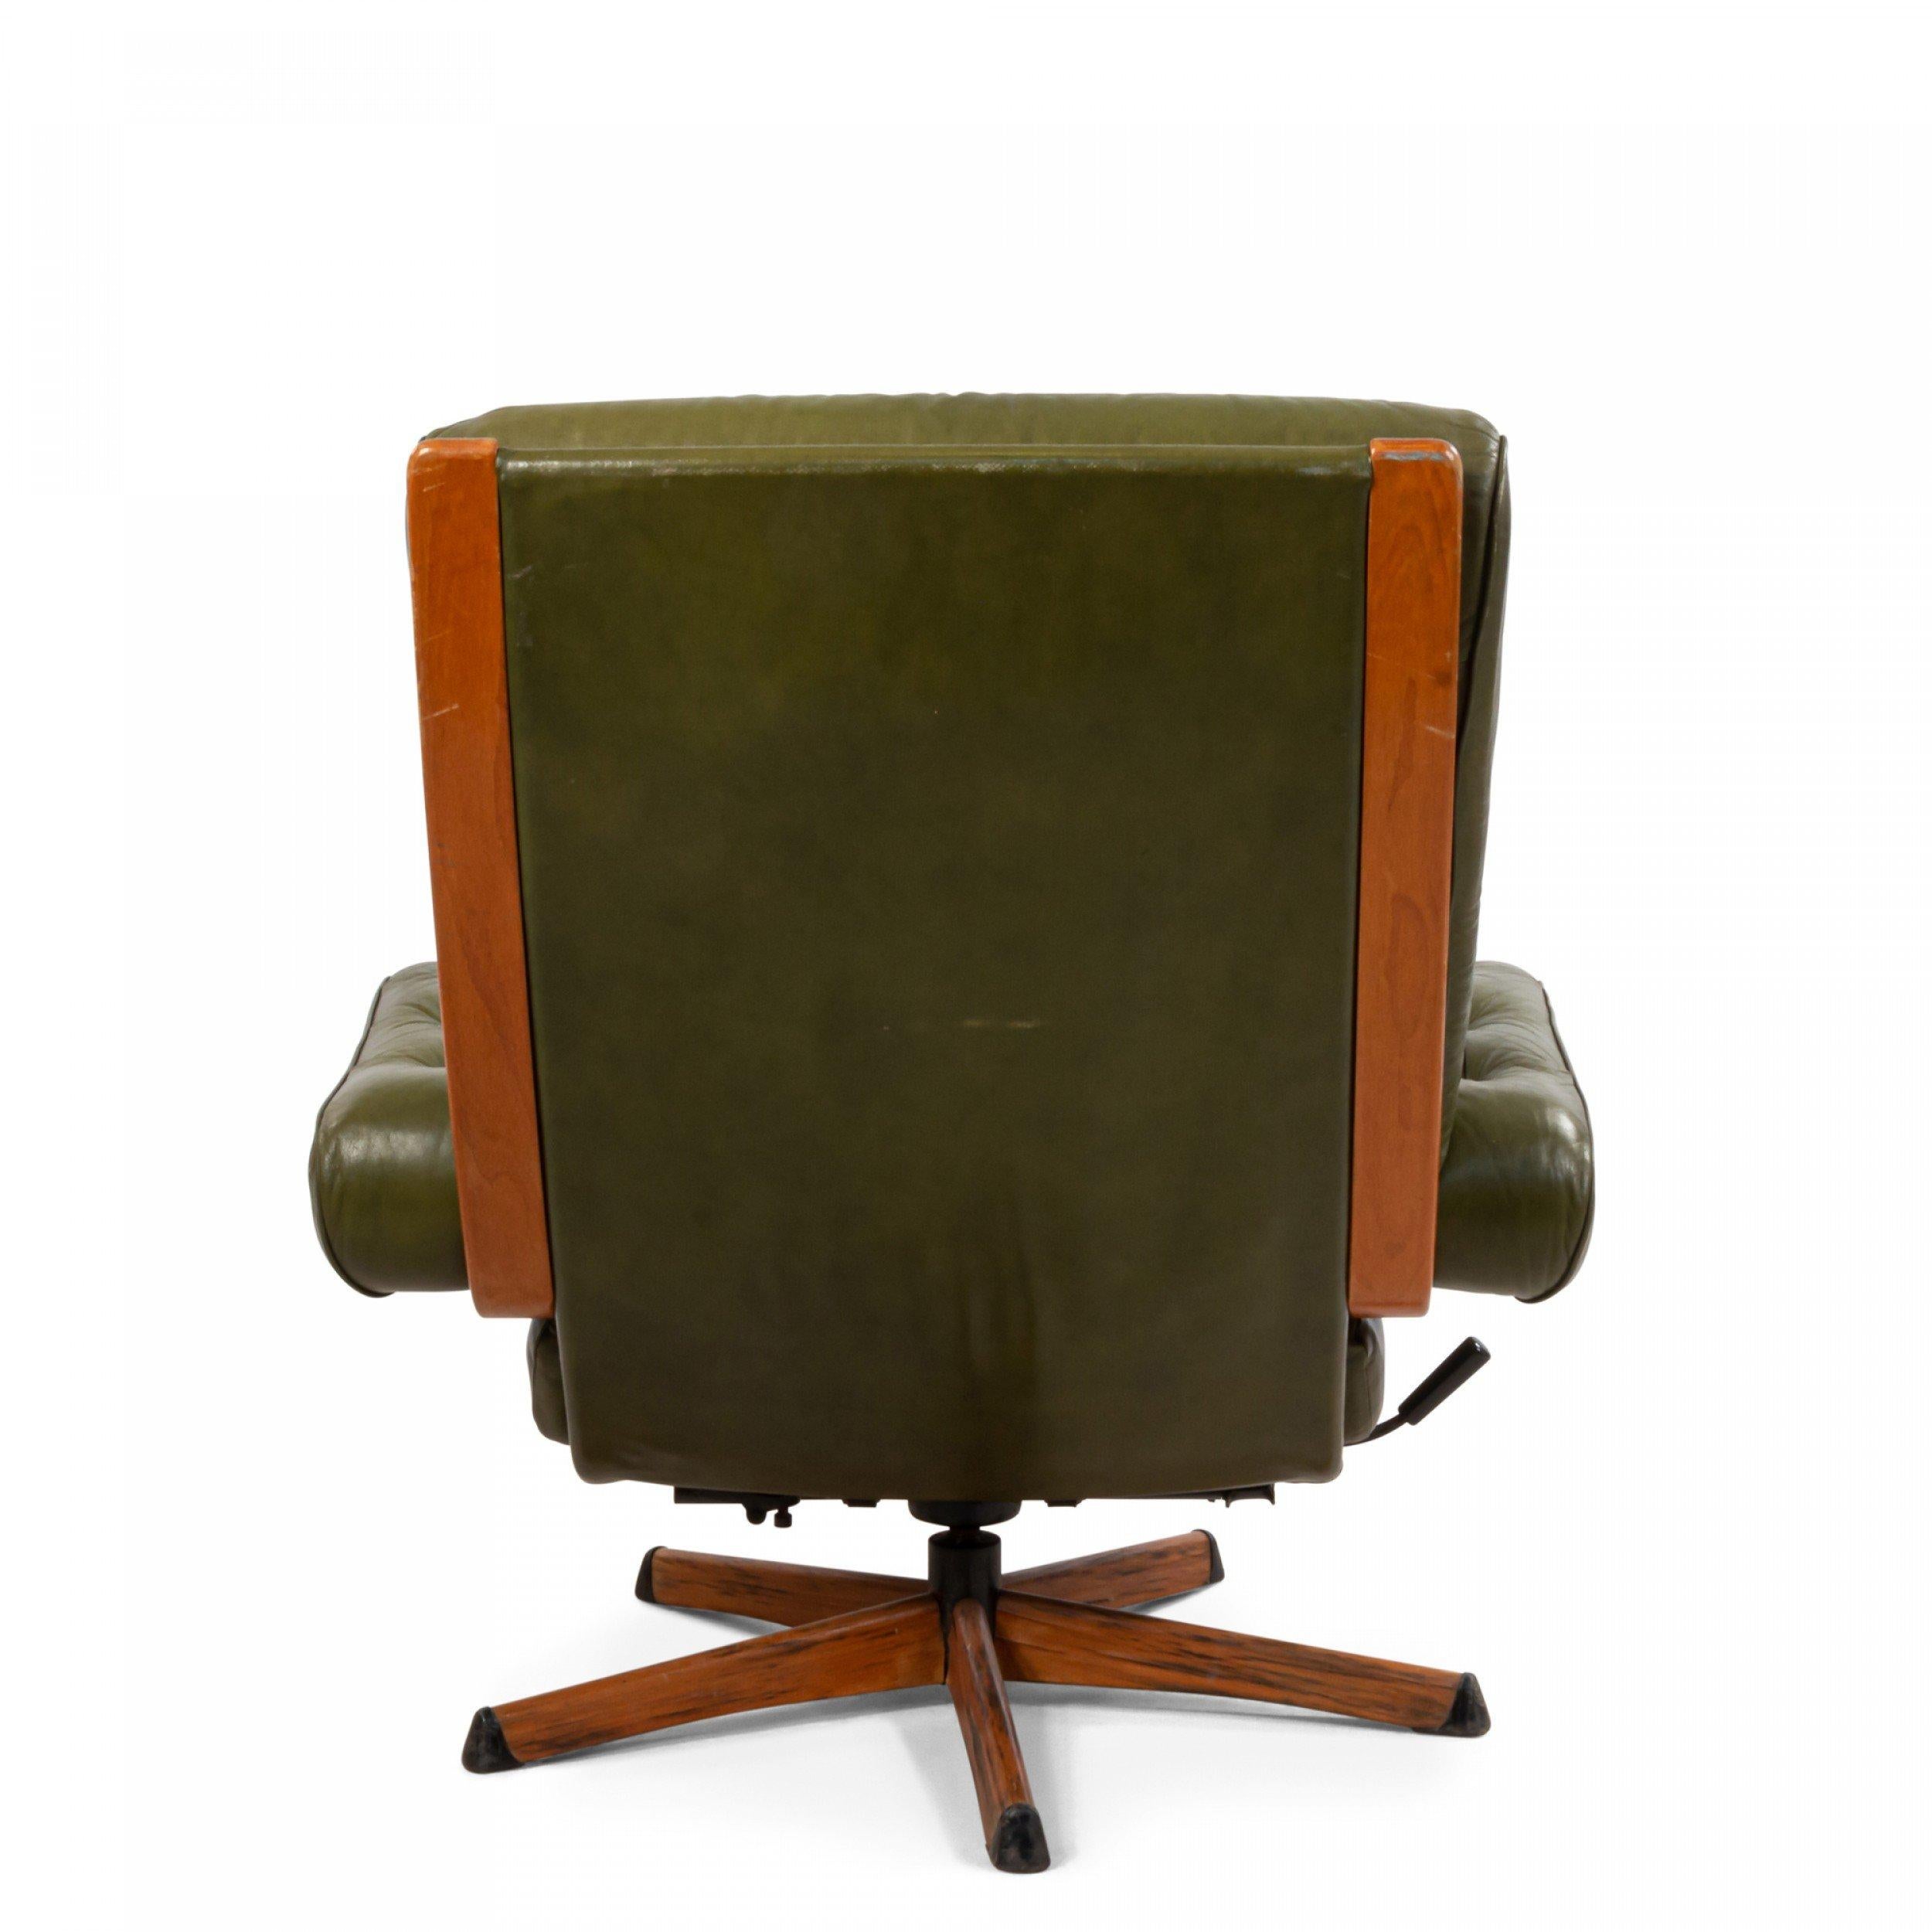 Mid-century green tufted leather armchair with wooden detail on a five-legged swivel base.